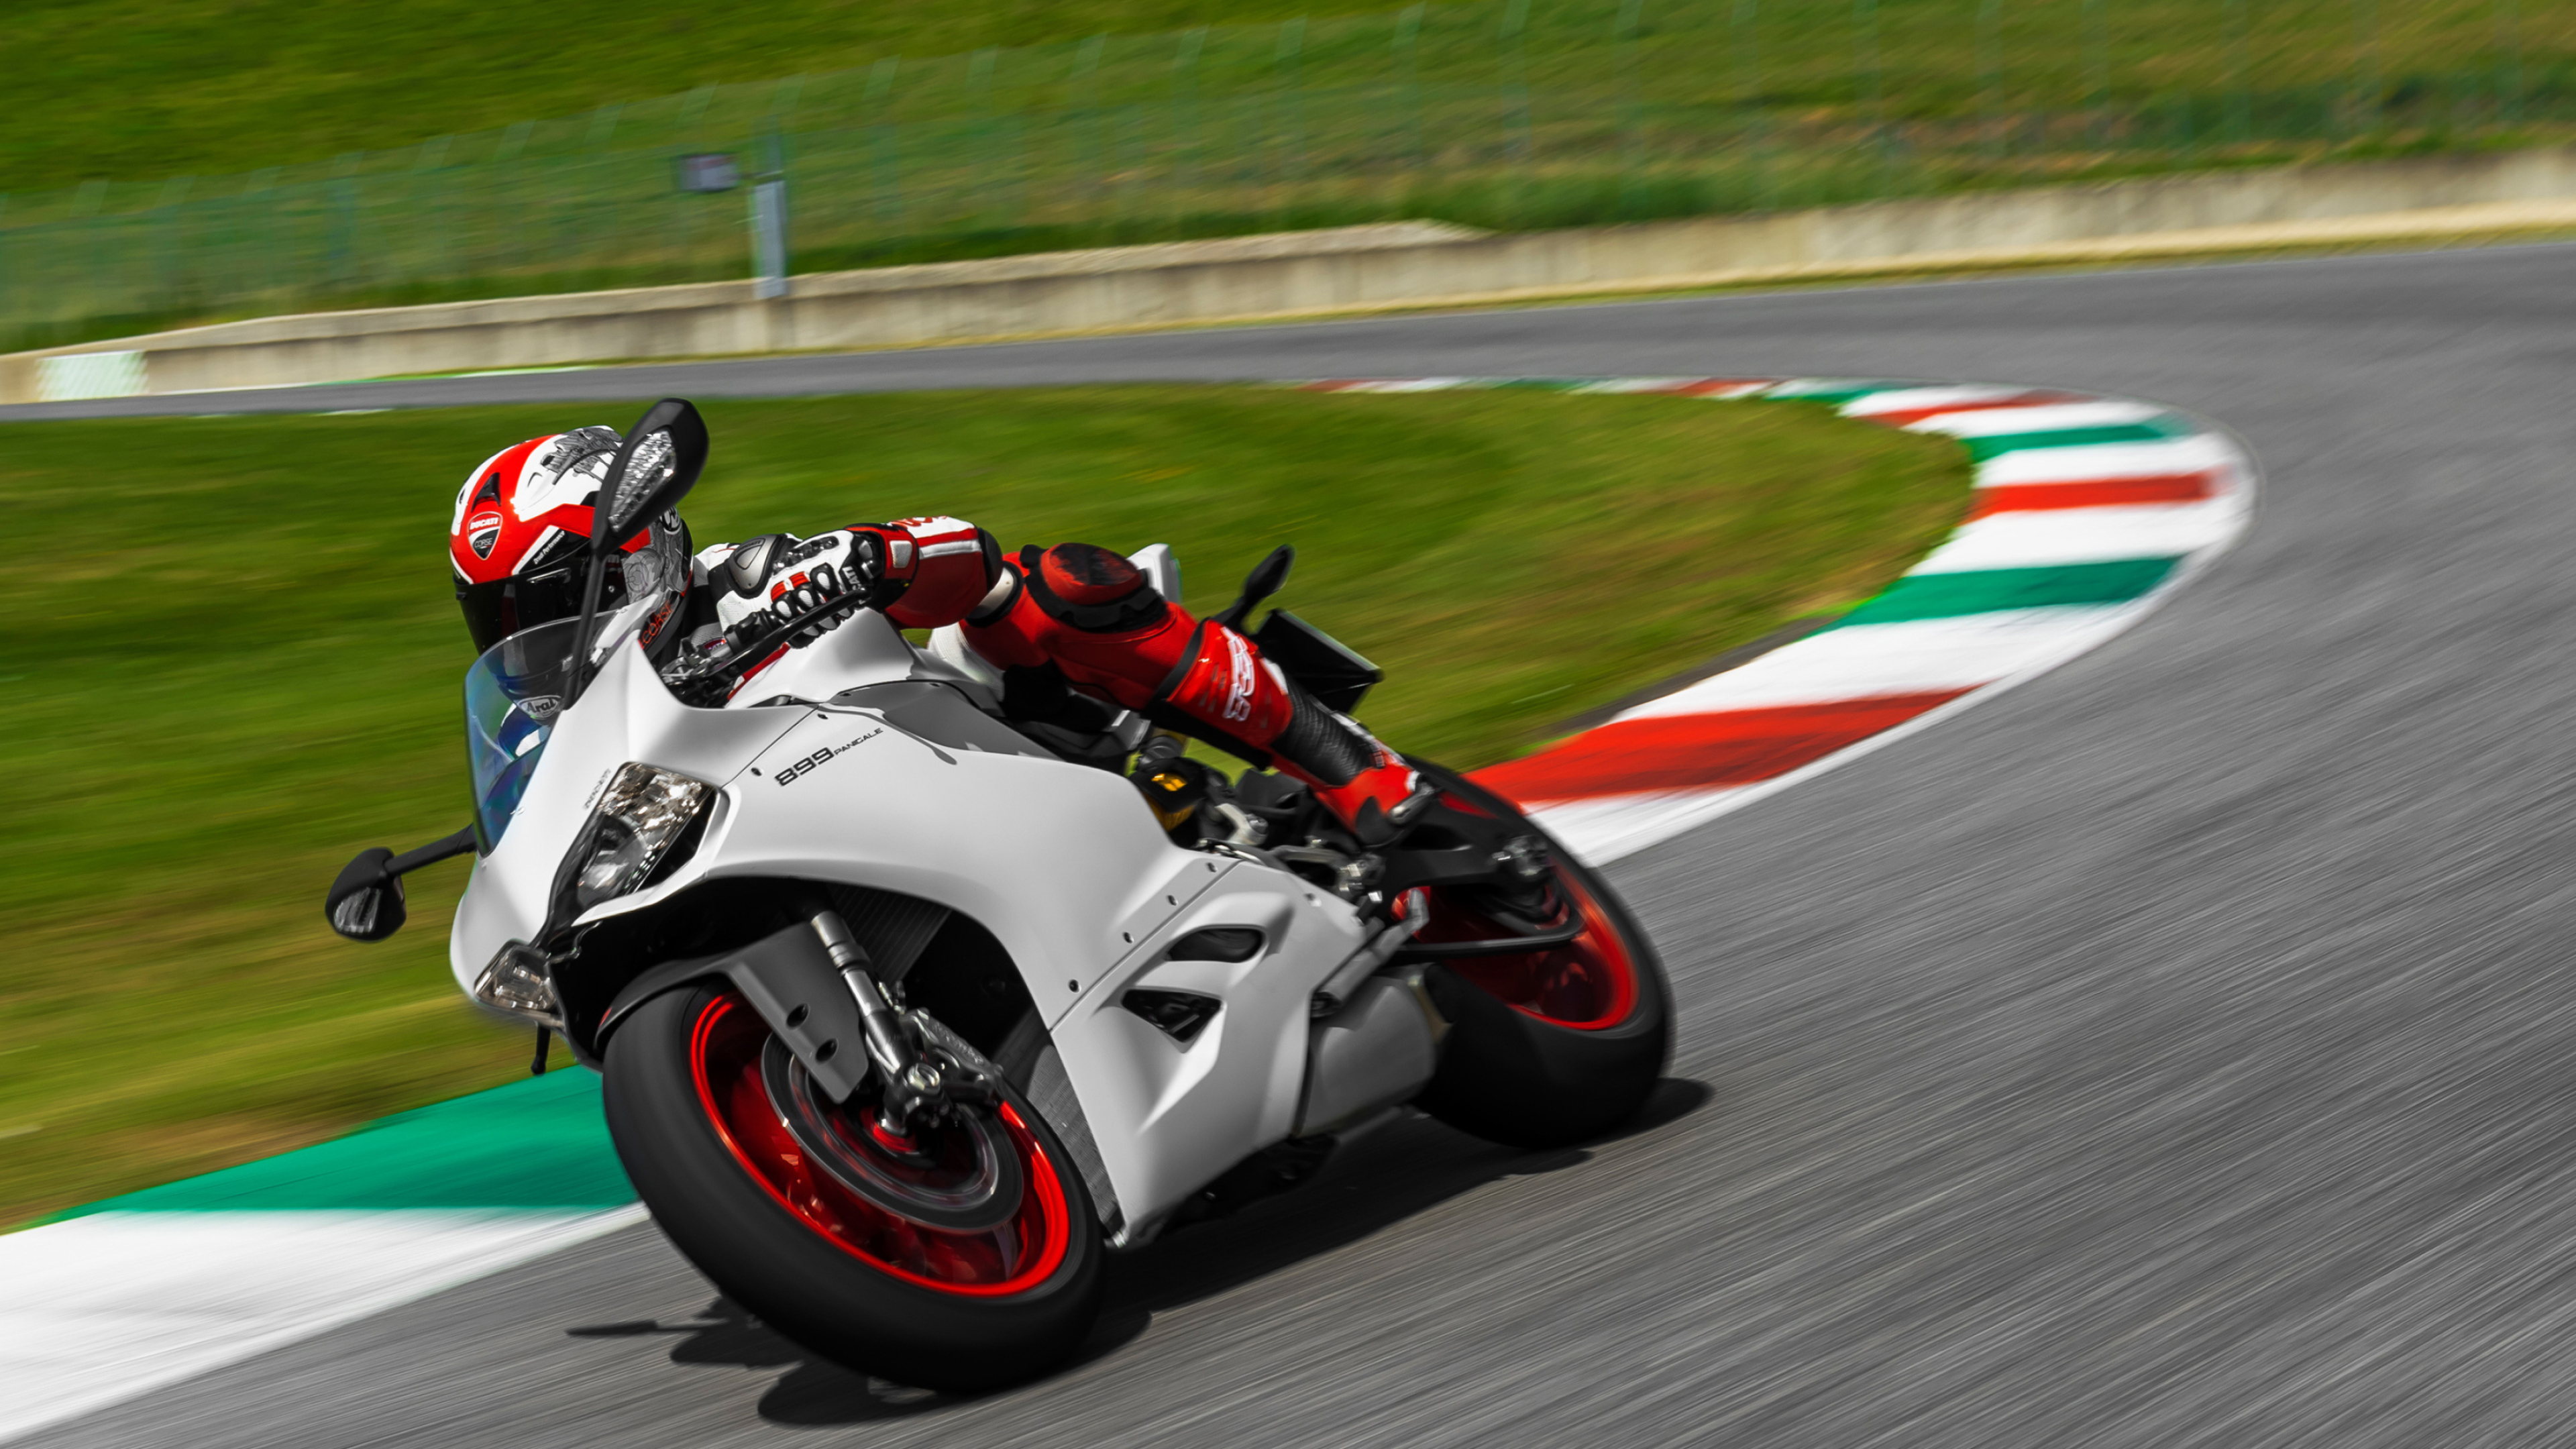 Superbike: Ducati 899 Panigale on the track, Professional wheels sports discipline, Moto racing. 3840x2160 4K Background.